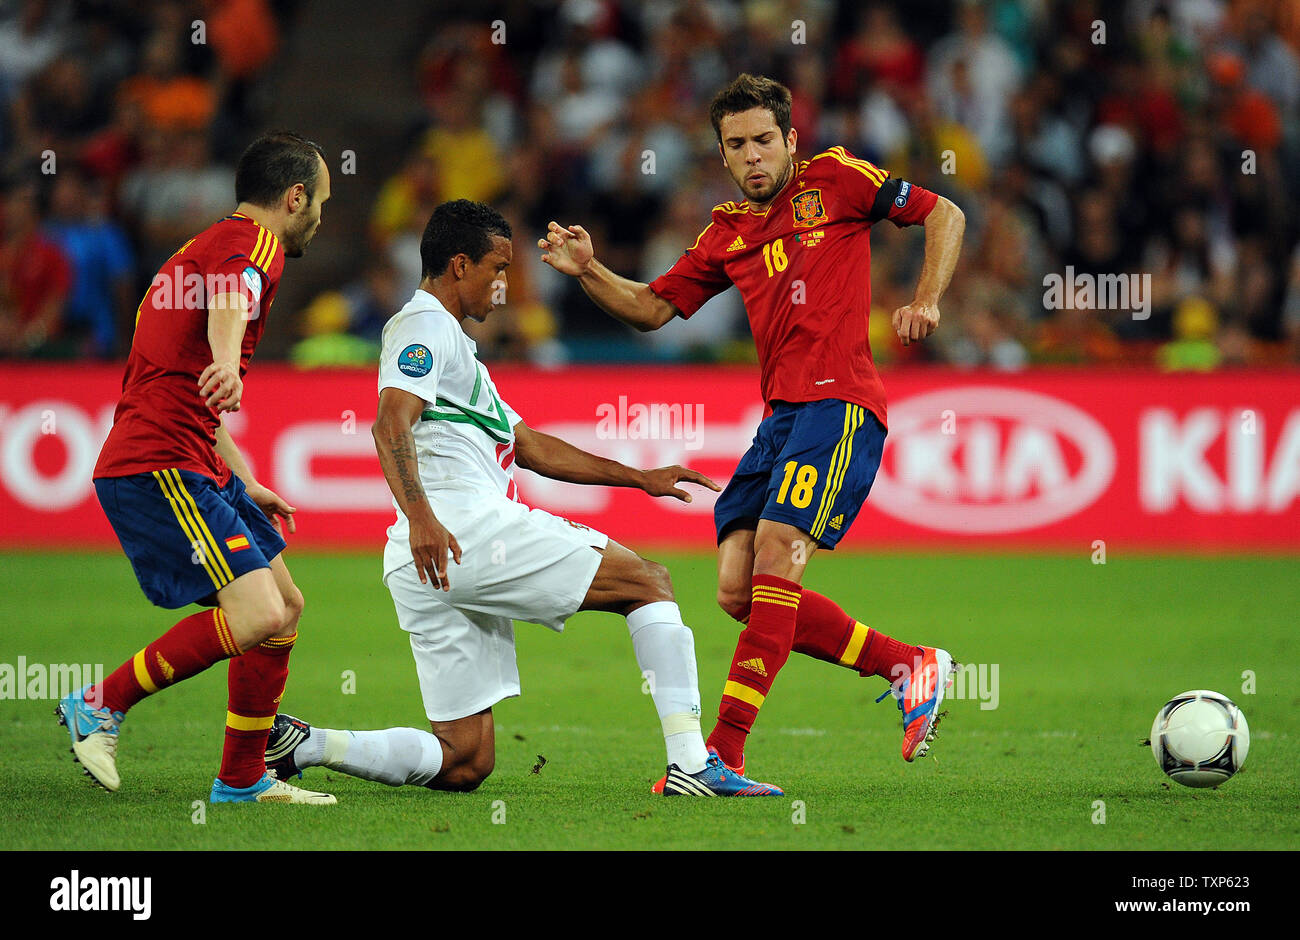 Jordi Alba and Andres iniesta of Spain in action with Nani of Portugal during the Euro 2012 Semi-Final match at Donbass Arena in Donetsk, Ukraine on June 27, 2012. UPI/Chris Brunskill Stock Photo